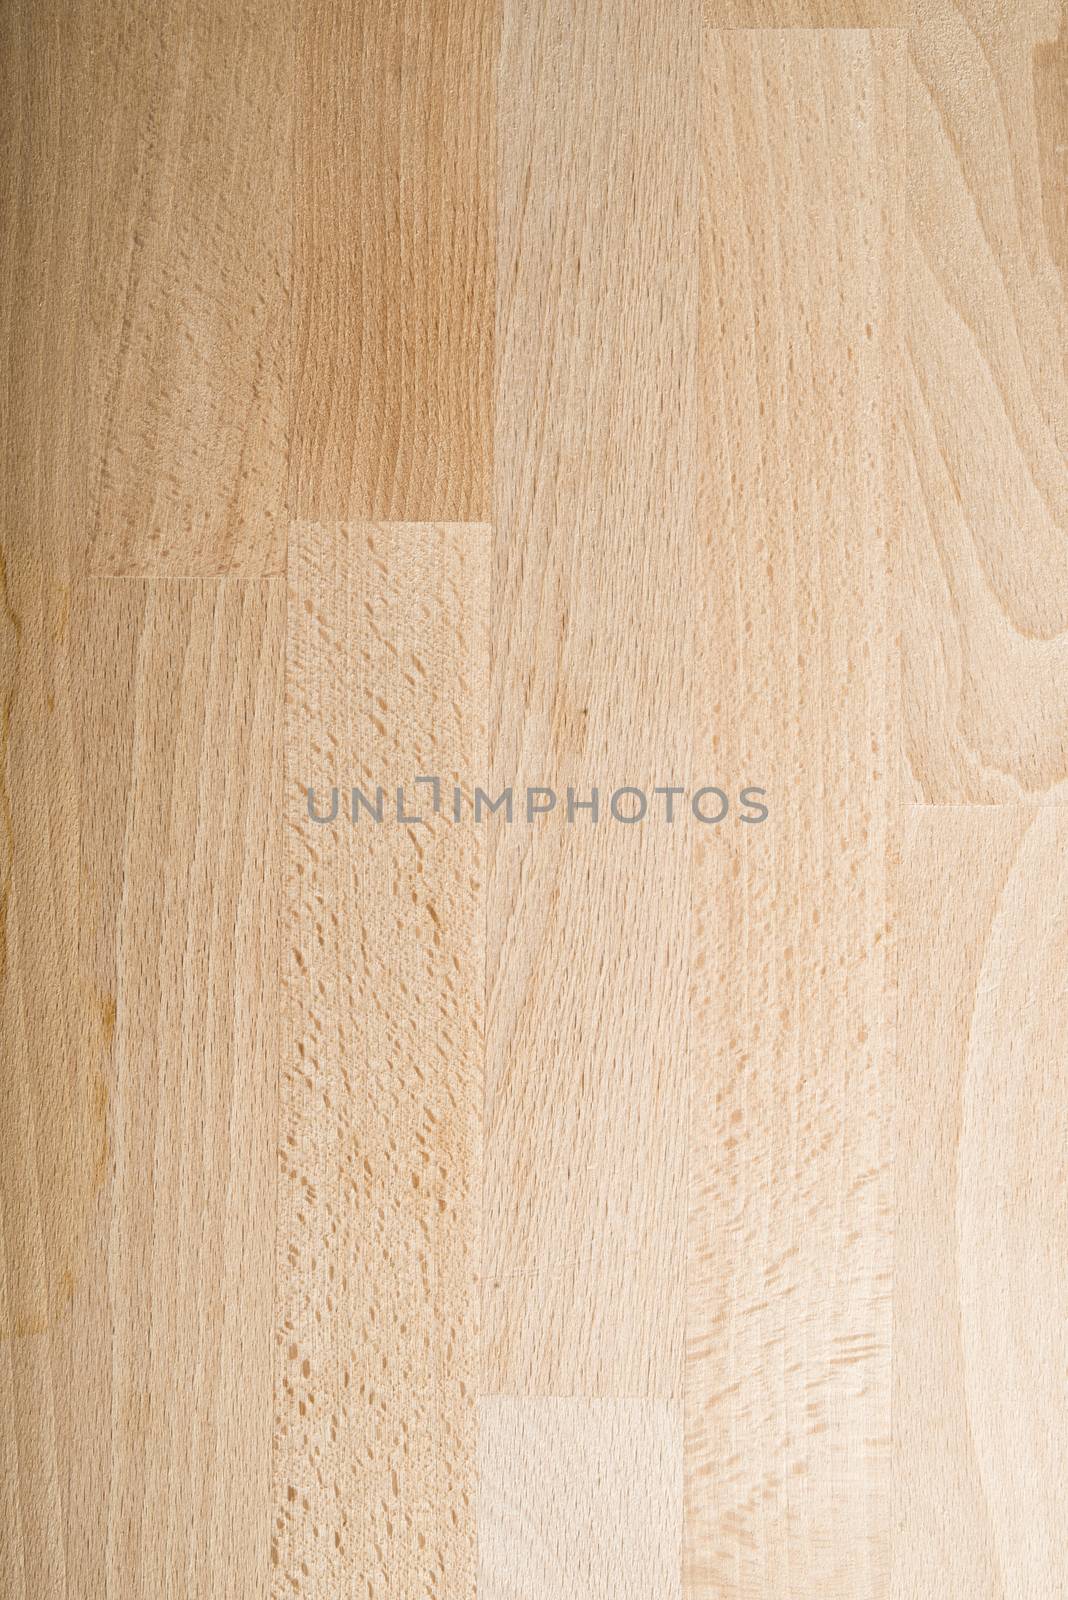 Light Brown Wooden Texture Background close-up macro